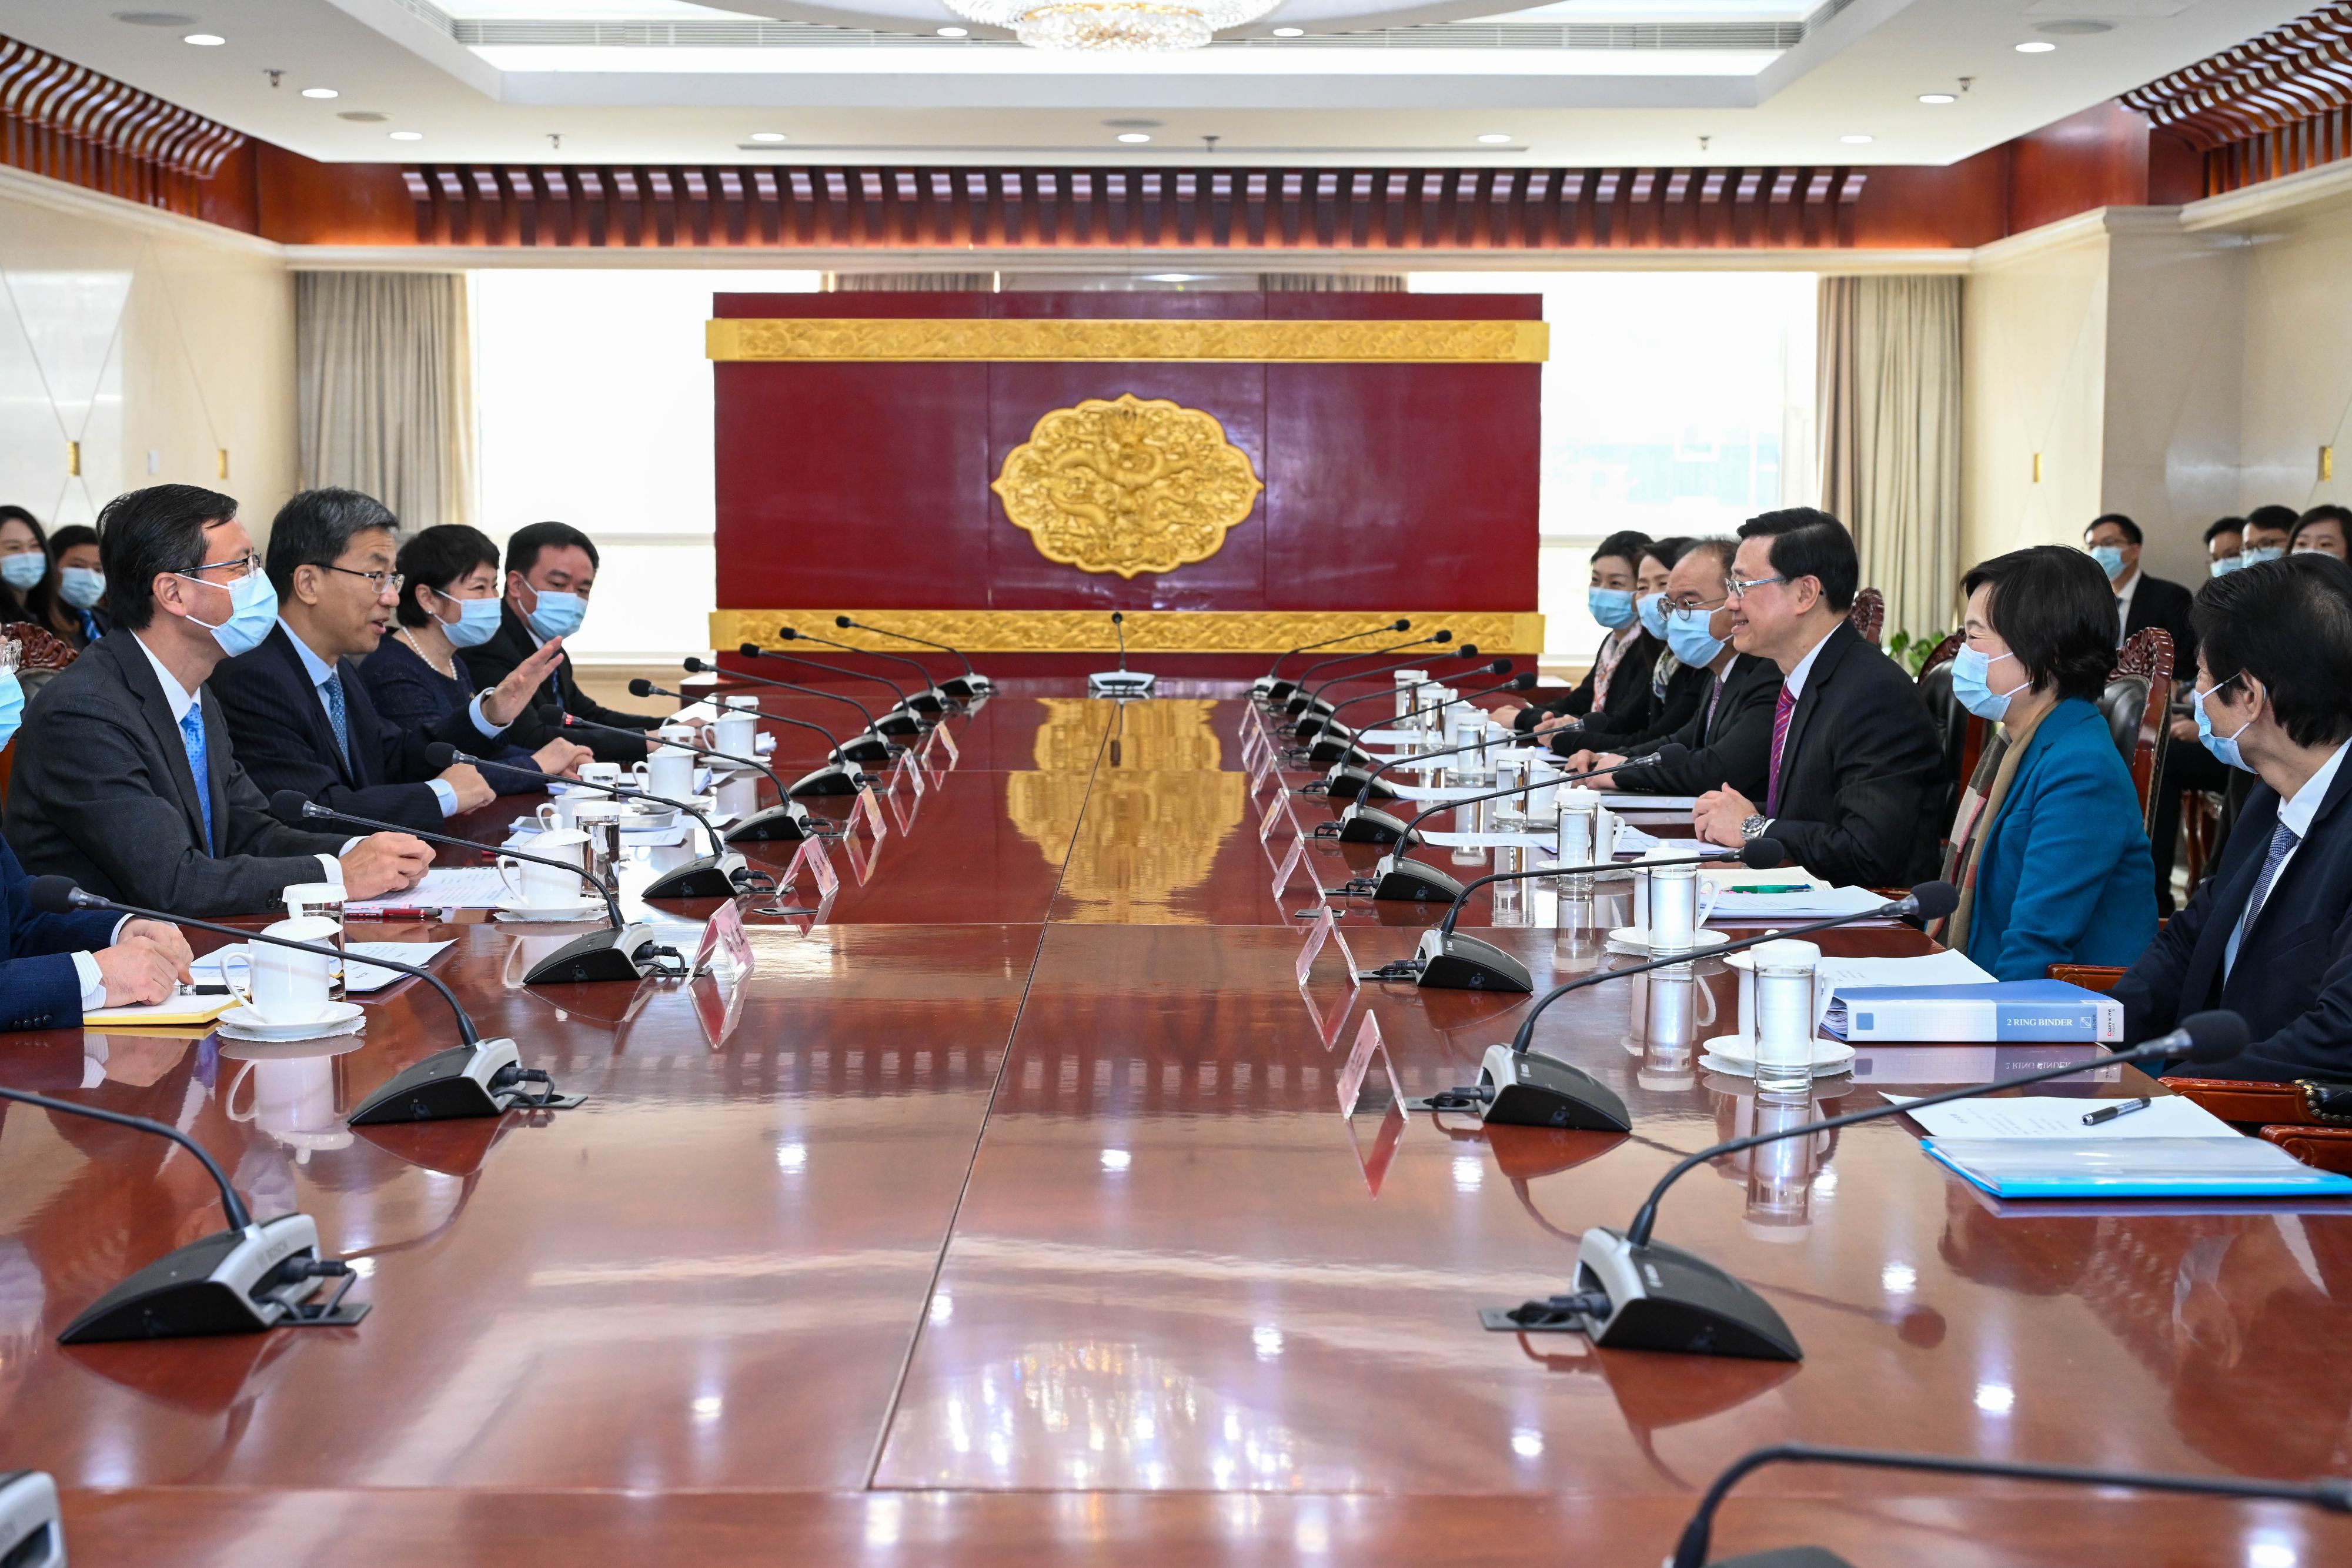 The Chief Executive, Mr John Lee (third right), meets with the Minister of Education, Mr Huai Jinpeng (second left), in Beijing this morning (March 16). Also attending the meeting are the Secretary for Constitutional and Mainland Affairs, Mr Erick Tsang Kwok-wai (fourth right); and the Secretary for Education, Dr Choi Yuk-lin (second right).